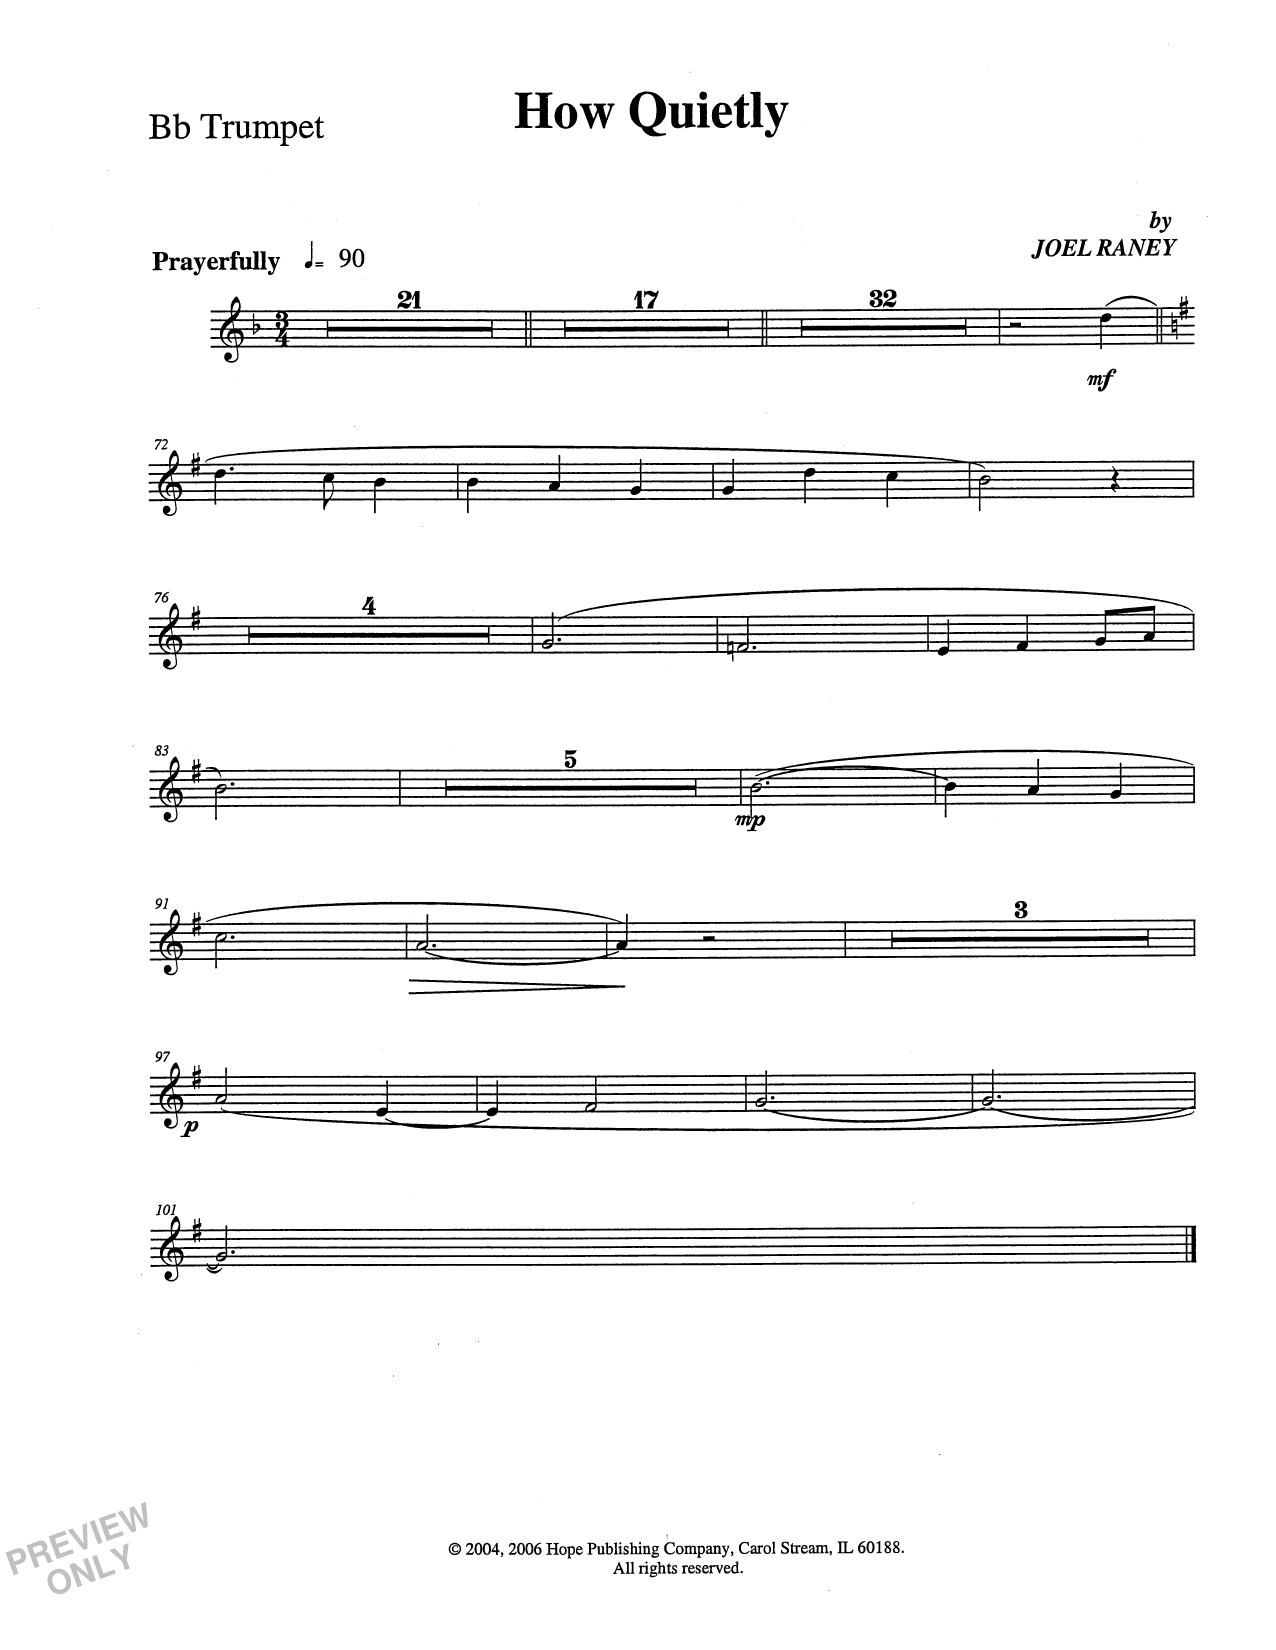 Download Joel Raney How Quietly - Trumpet Sheet Music